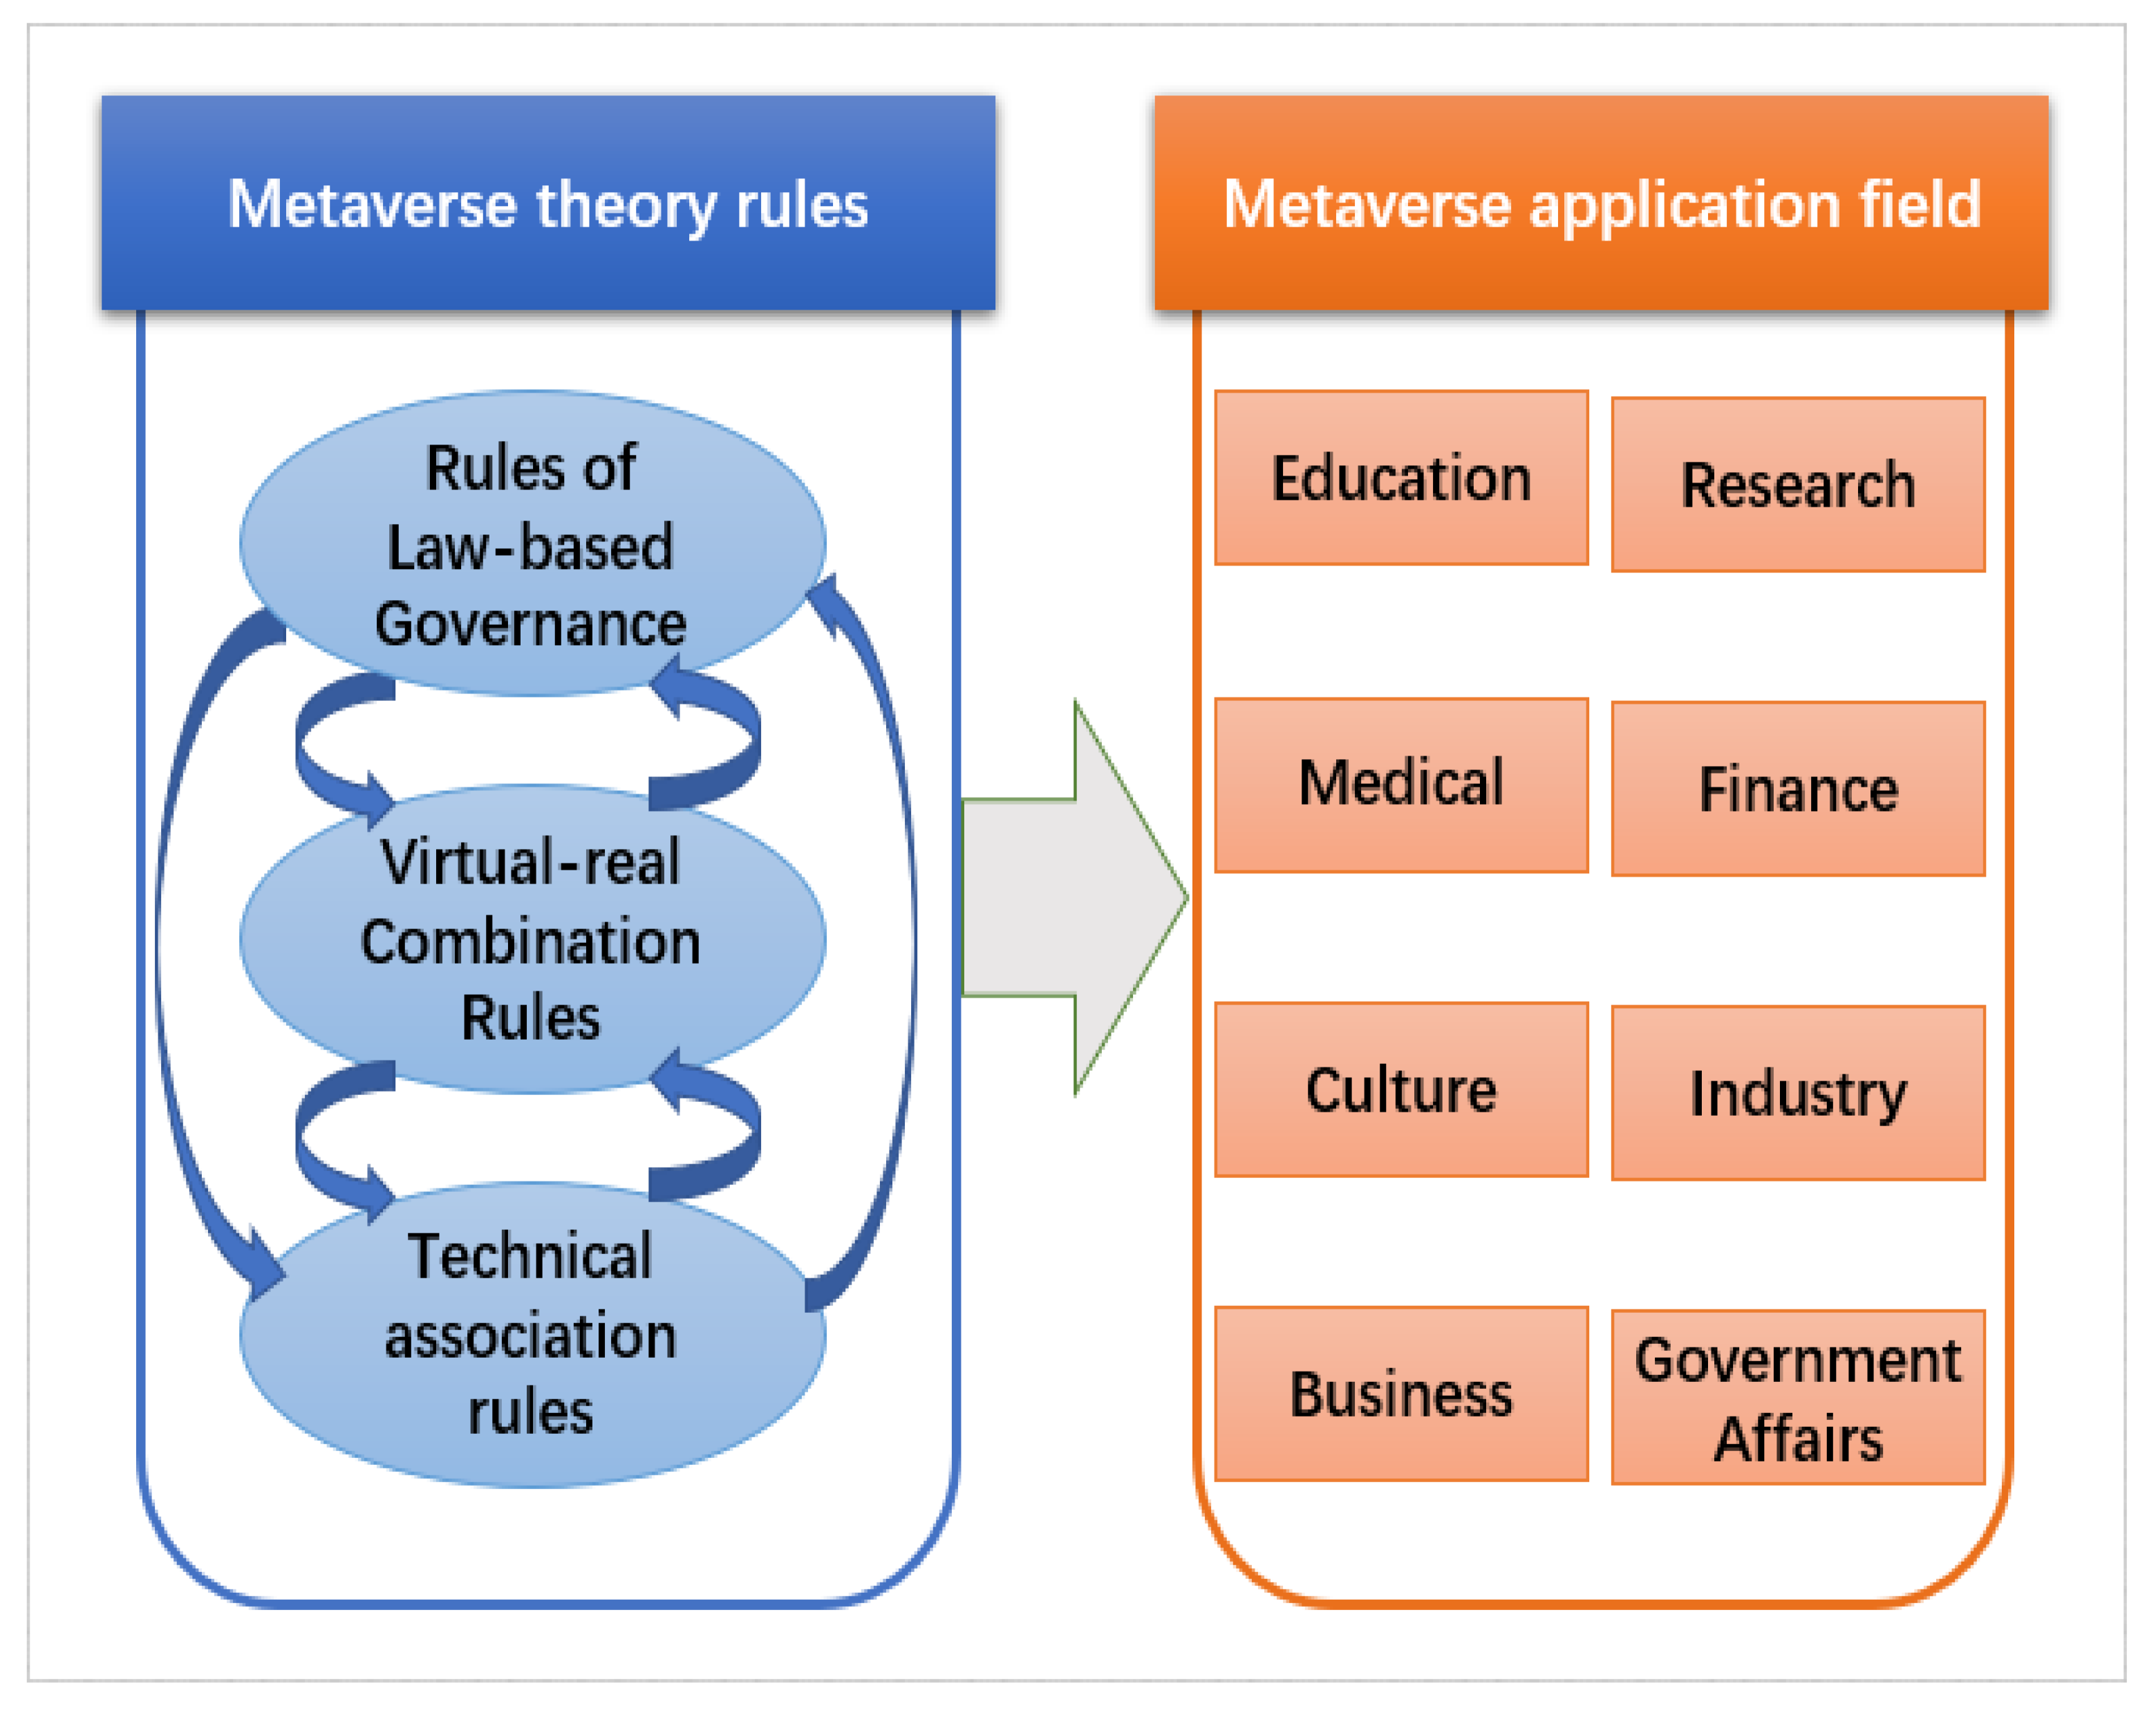 Metaverse use cases - Which industries could the metaverse impact? 